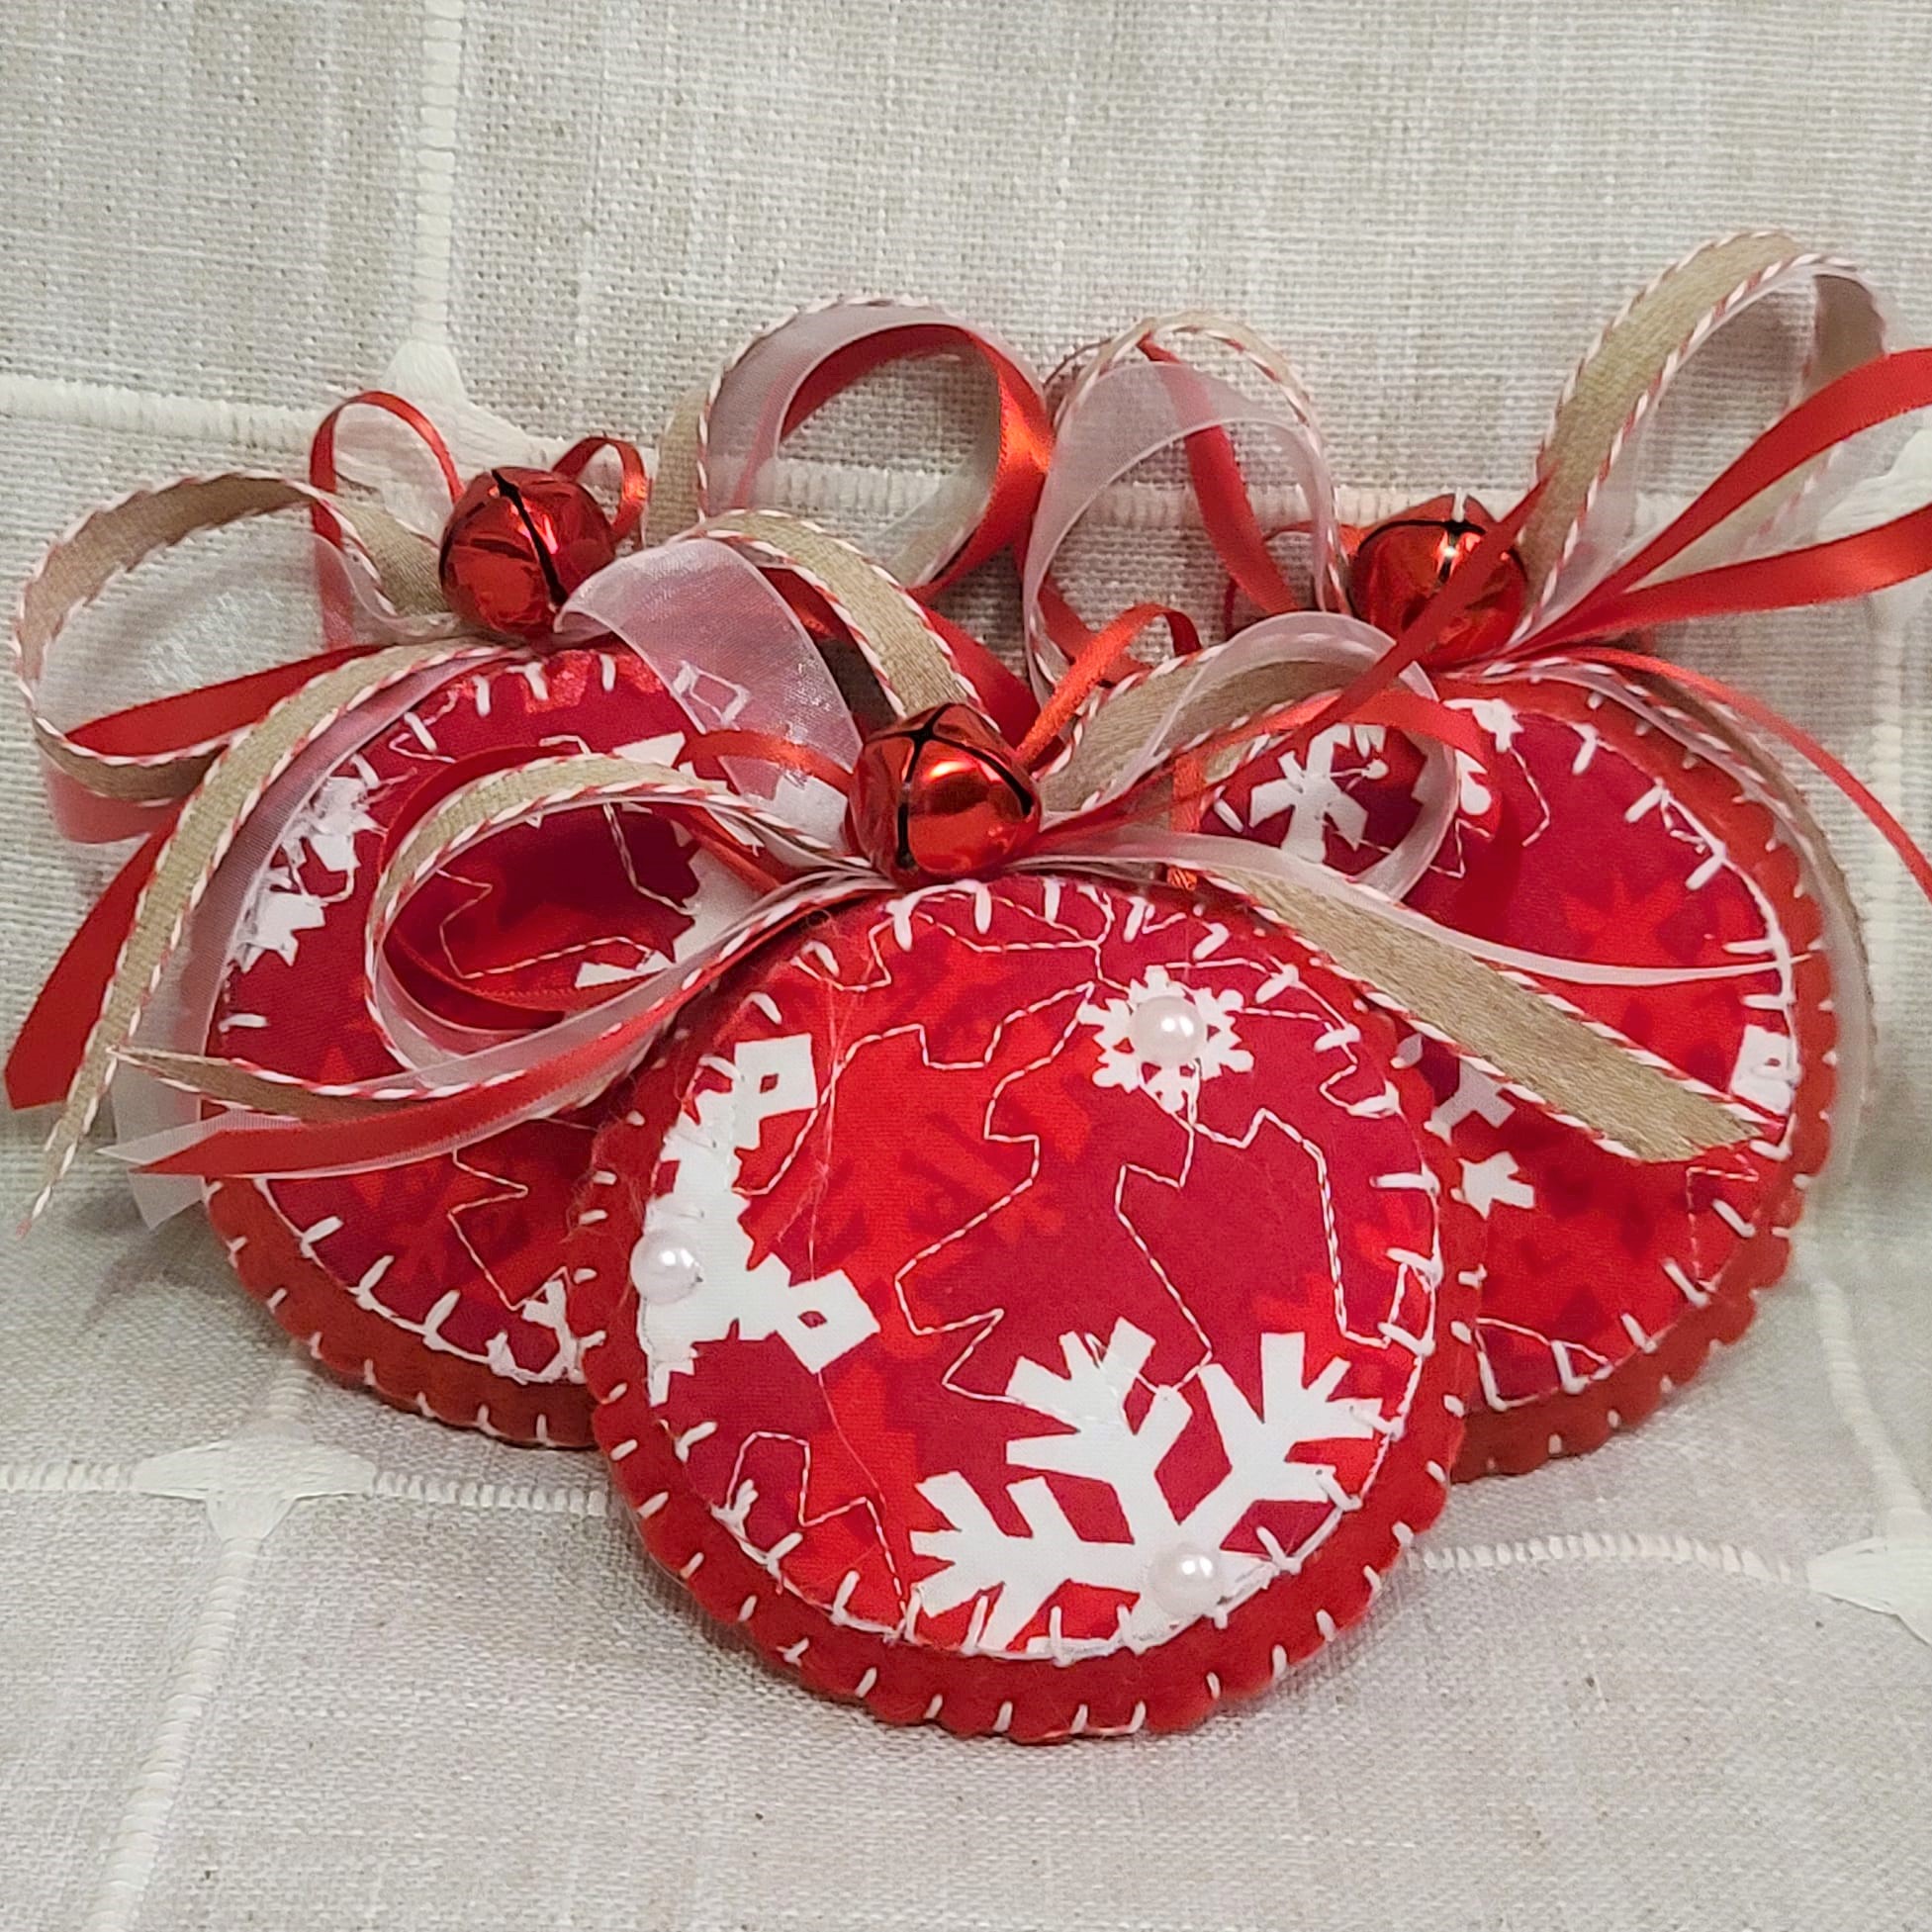 Red & white snowflake quilt and felt round ornament - burlap bow